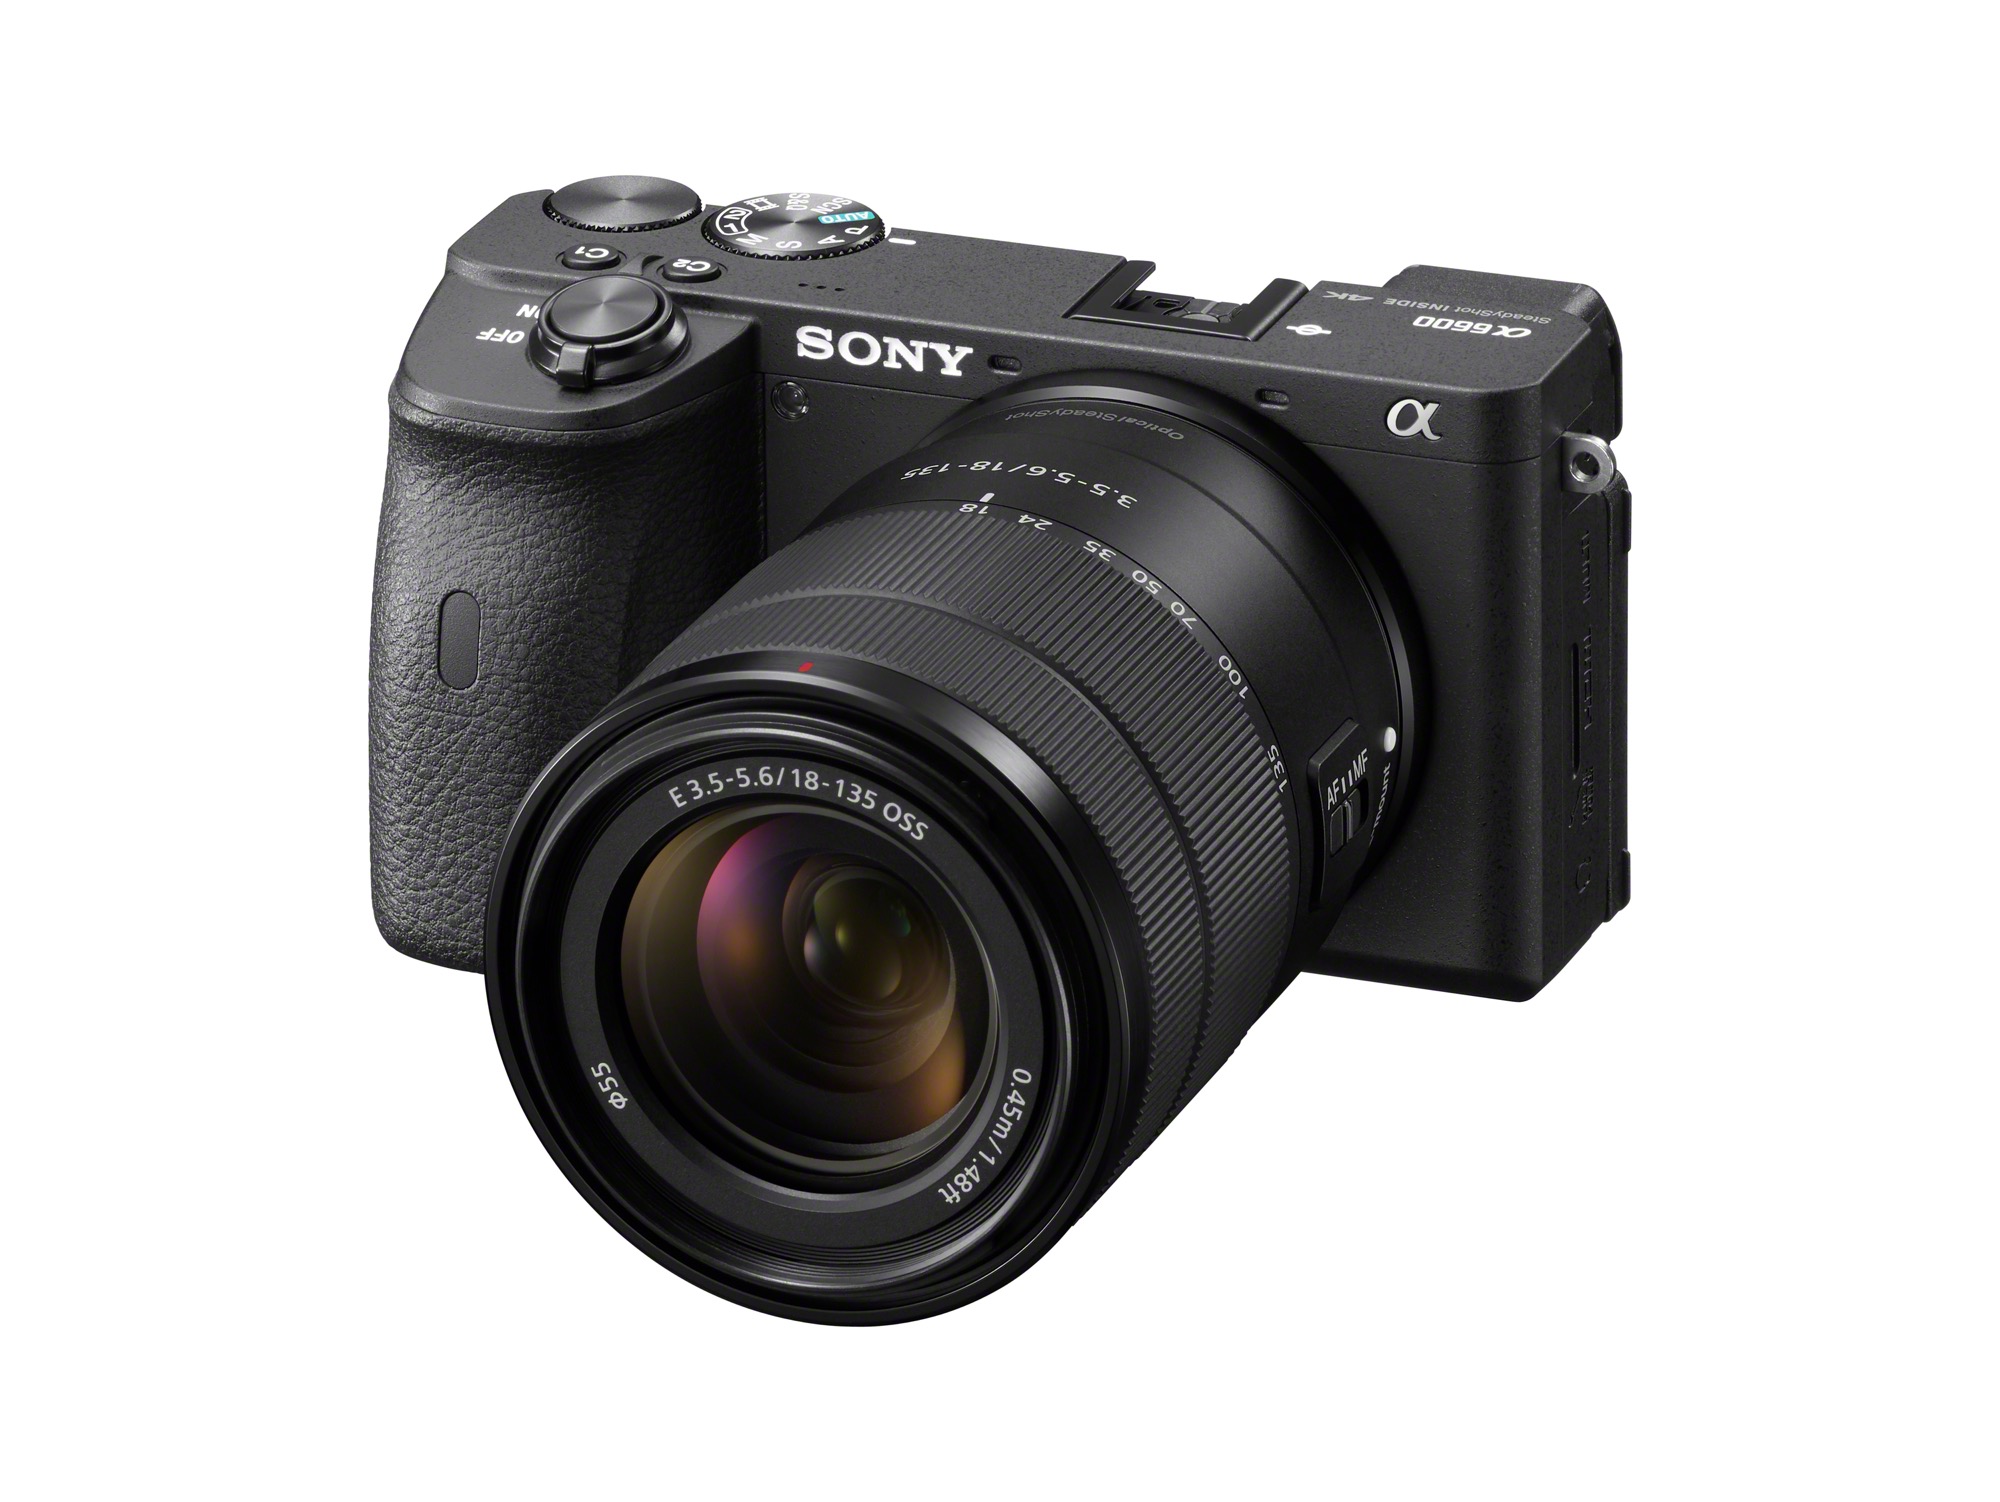 Sony’s New a6100 and a6600 APS-C Cameras to Cost $750 and $1400